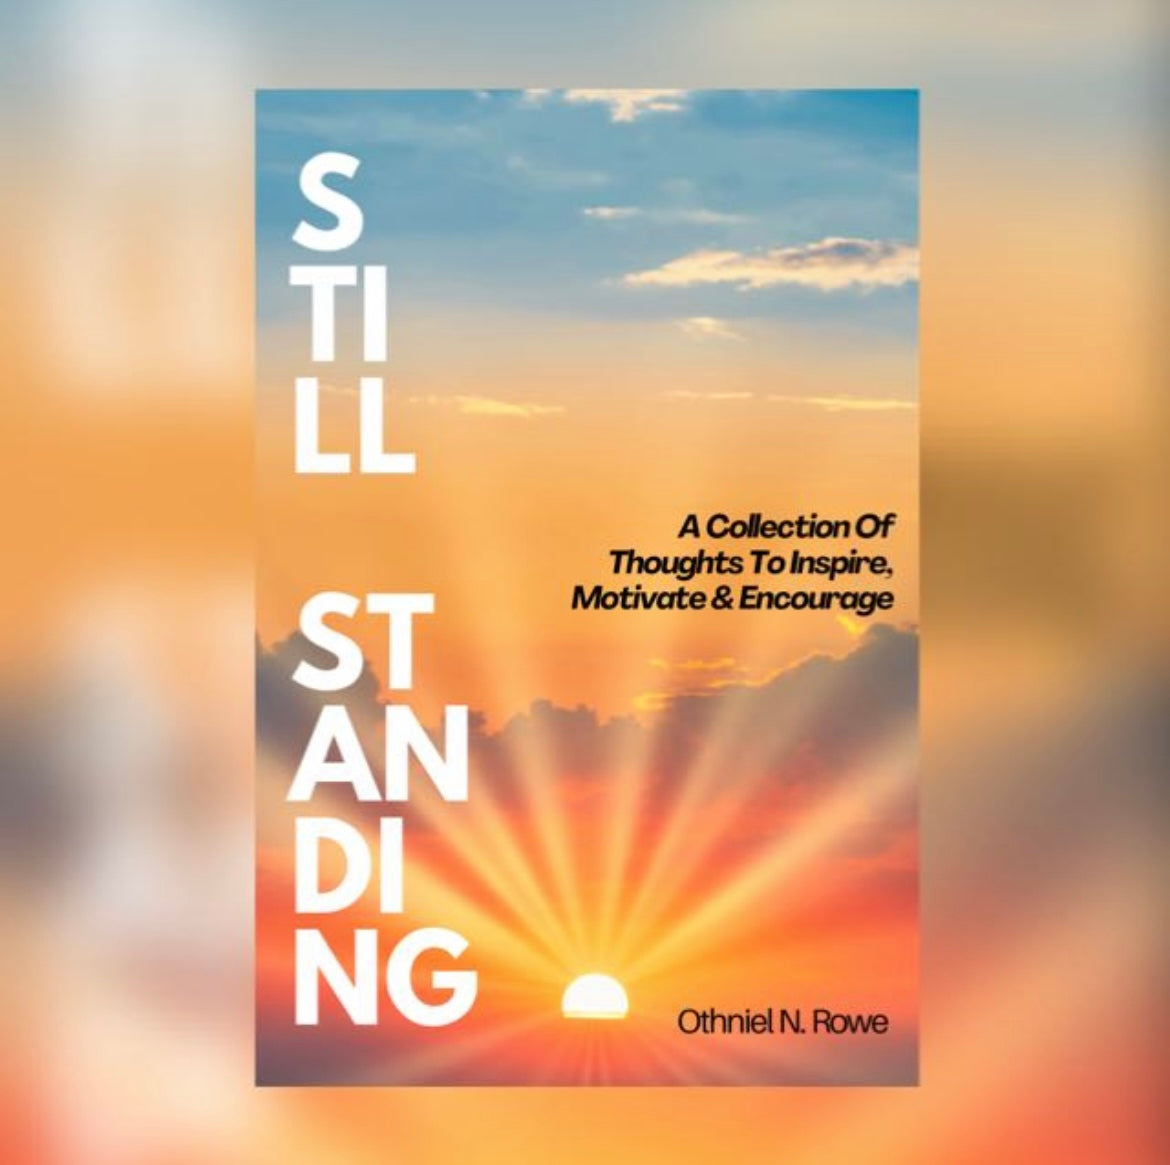 STILL STANDING: A Collection Of Thoughts To Inspire, Motivate and Encourage